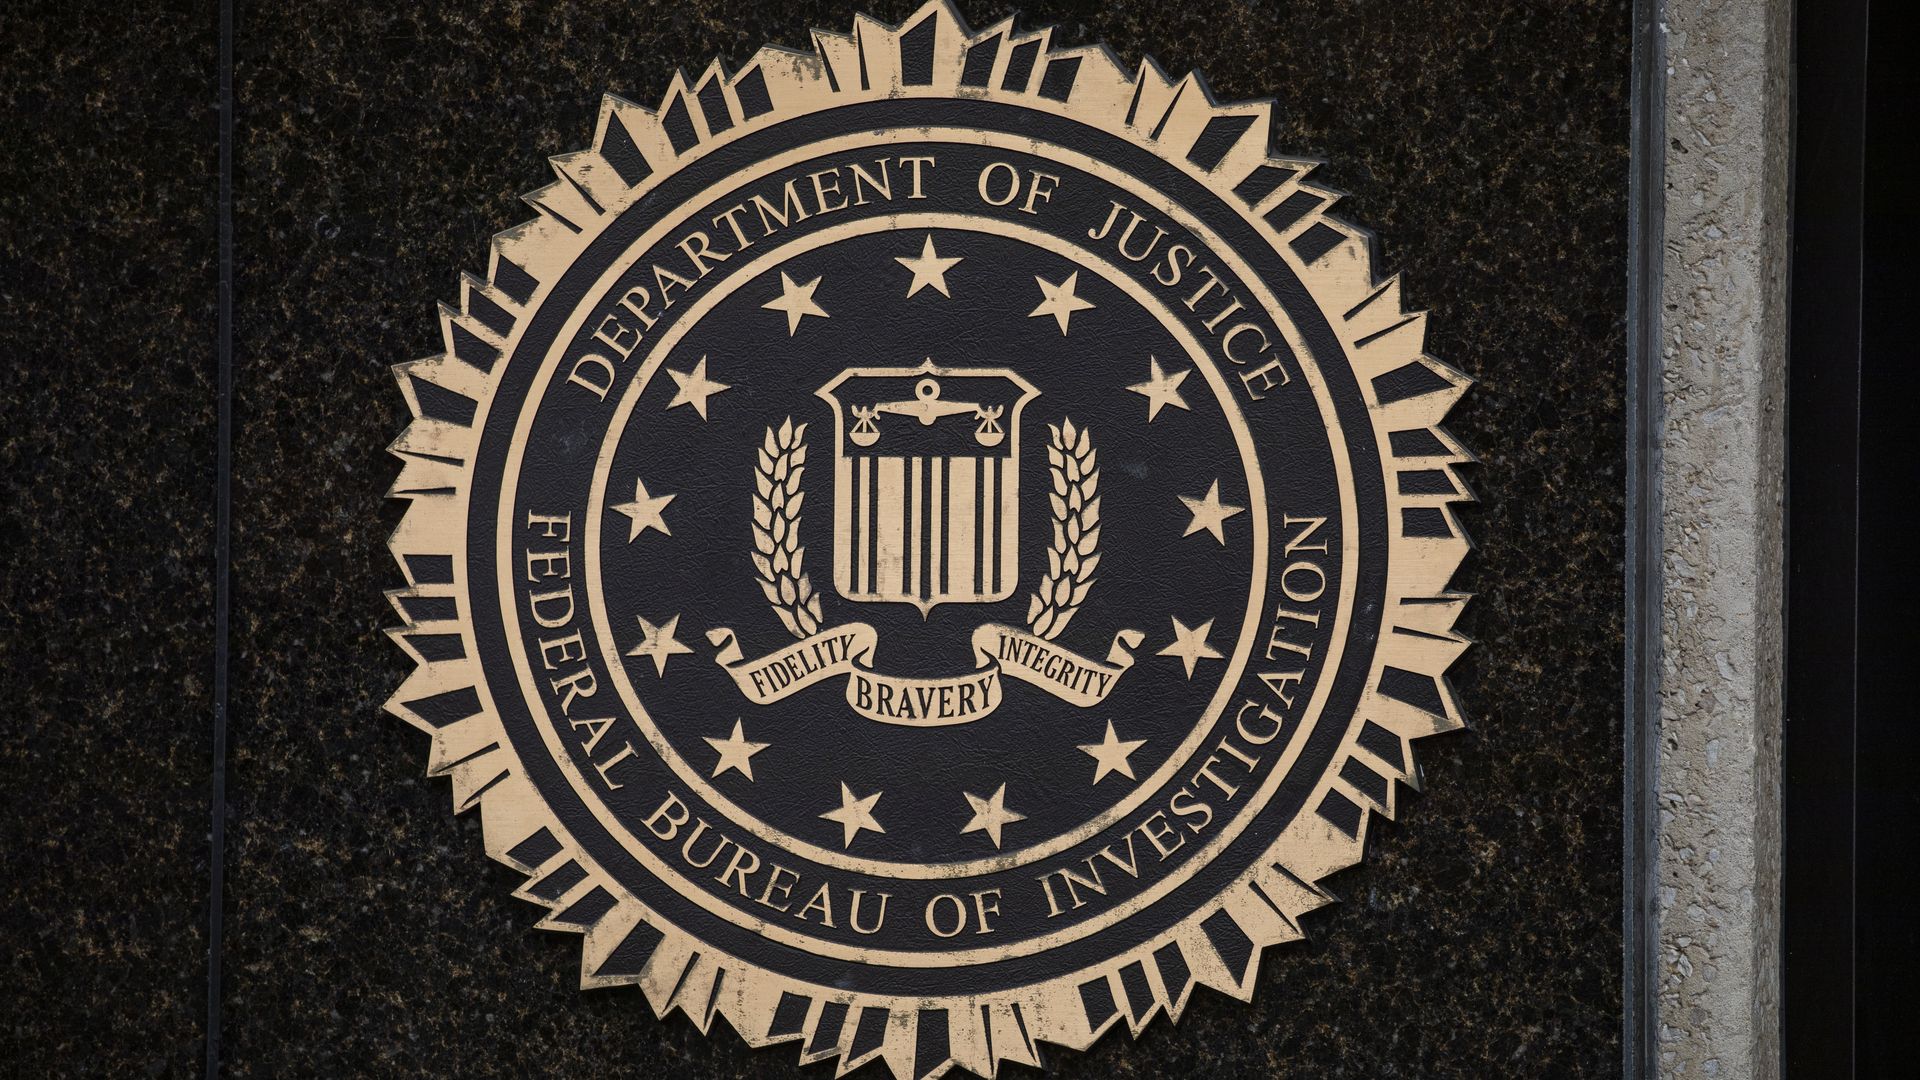 The seal of the FBI.